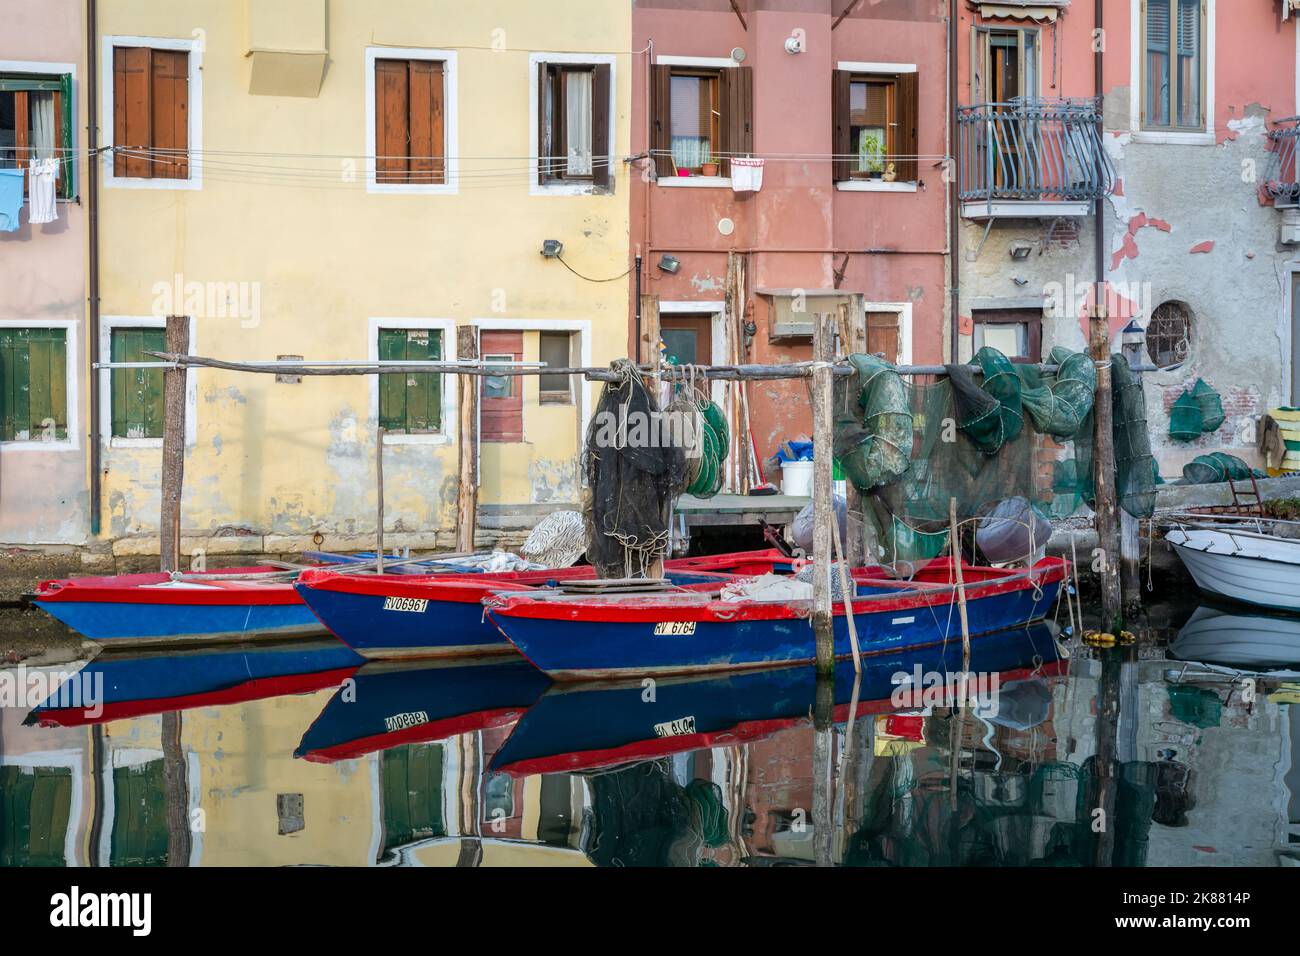 old blue wooden boats in the canal Chioggia city - Venetian Lagoon -  little Venice, Veneto region, northern Italy Stock Photo